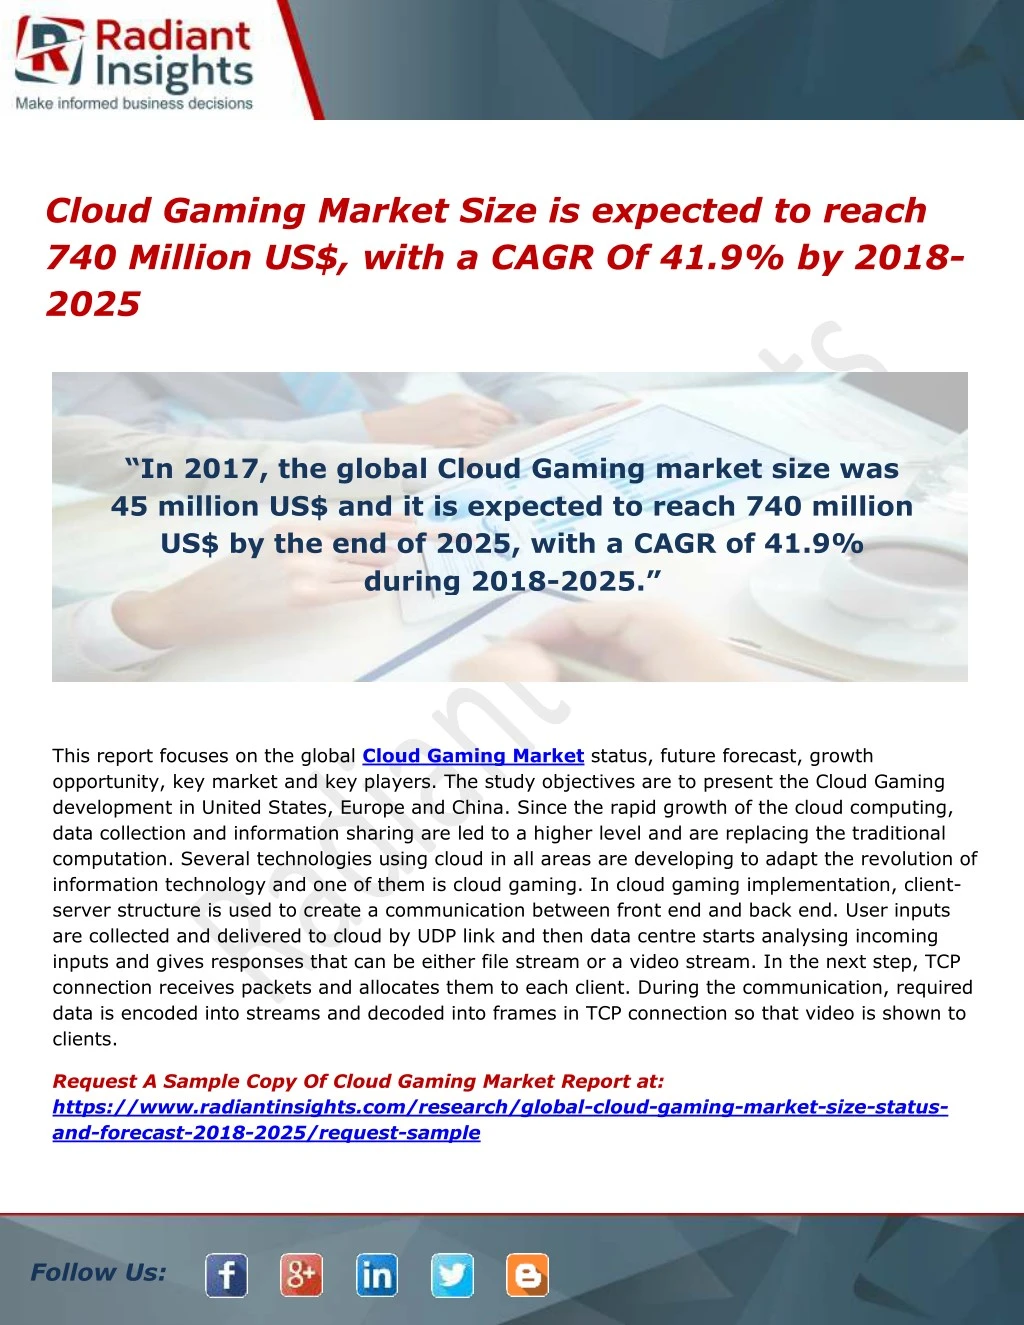 cloud gaming market size is expected to reach